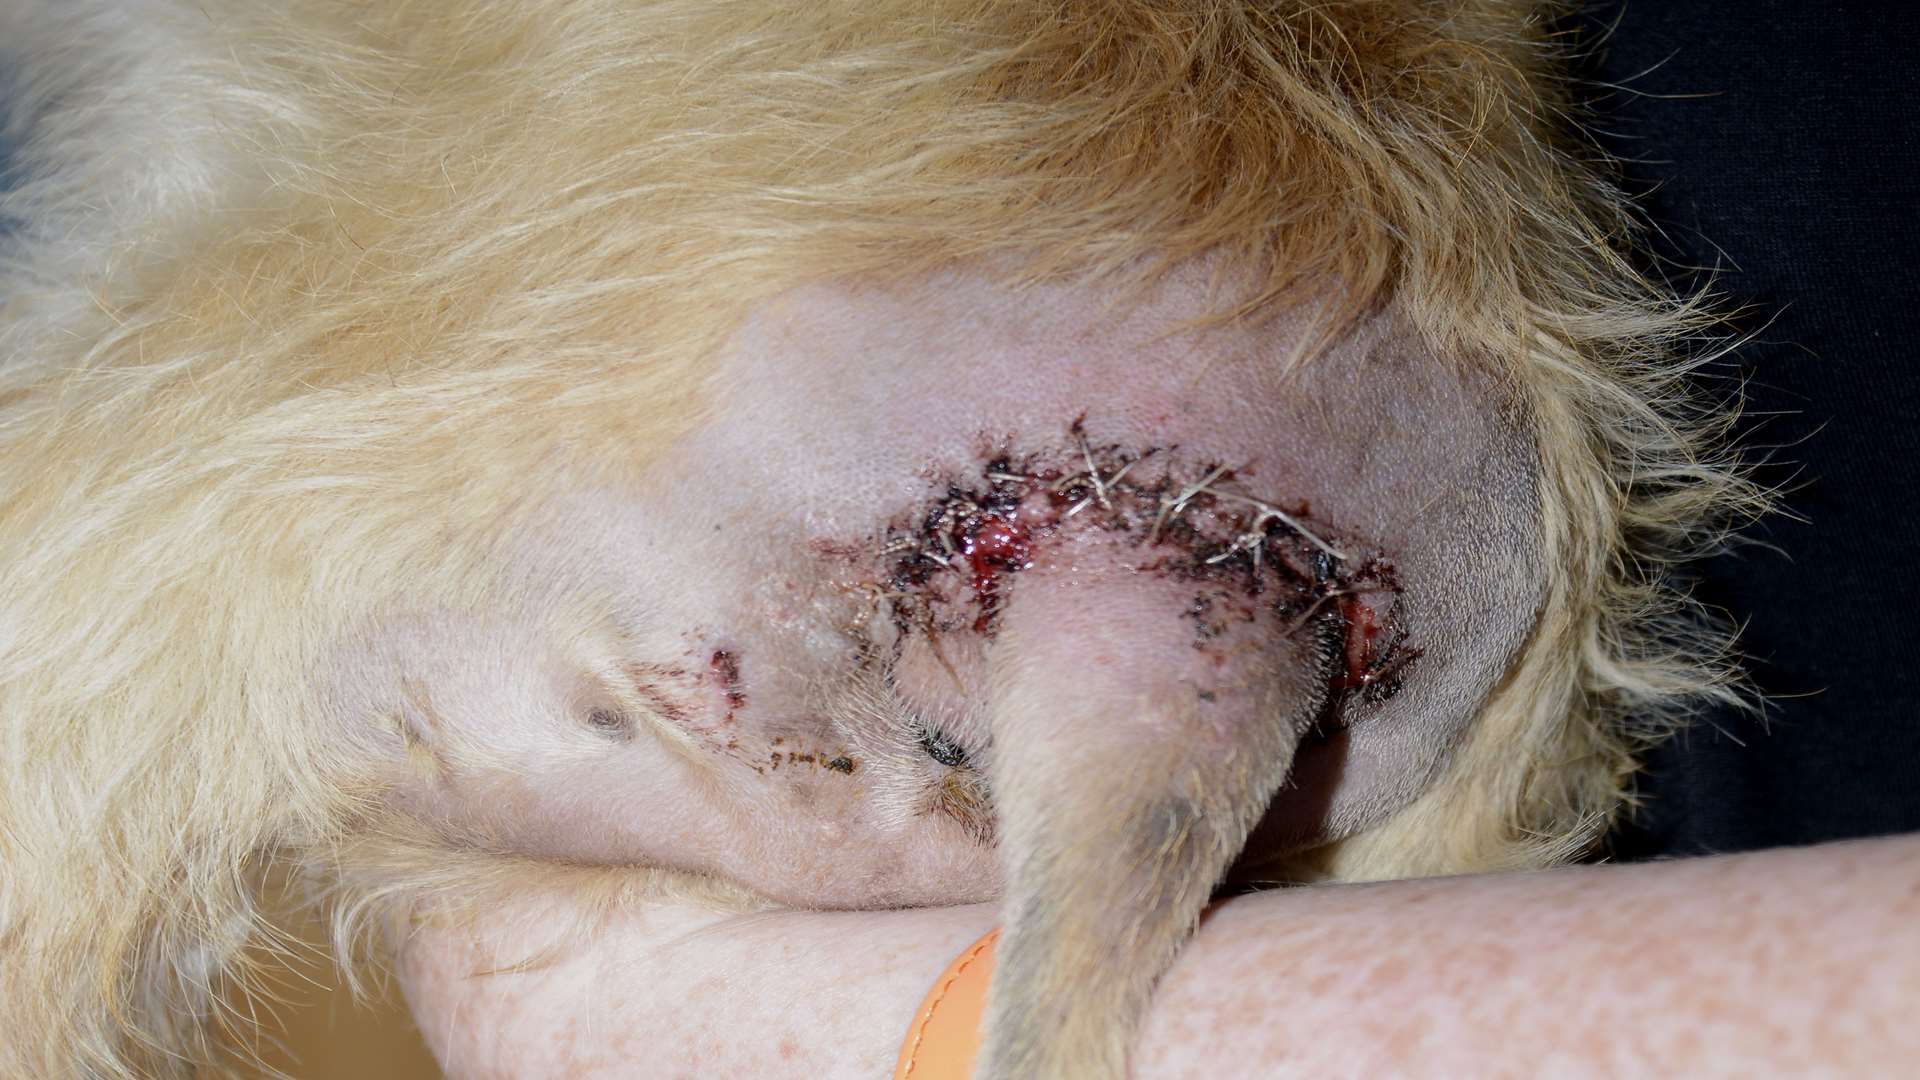 Molly needed 18 stitches after she was bitten by another dog